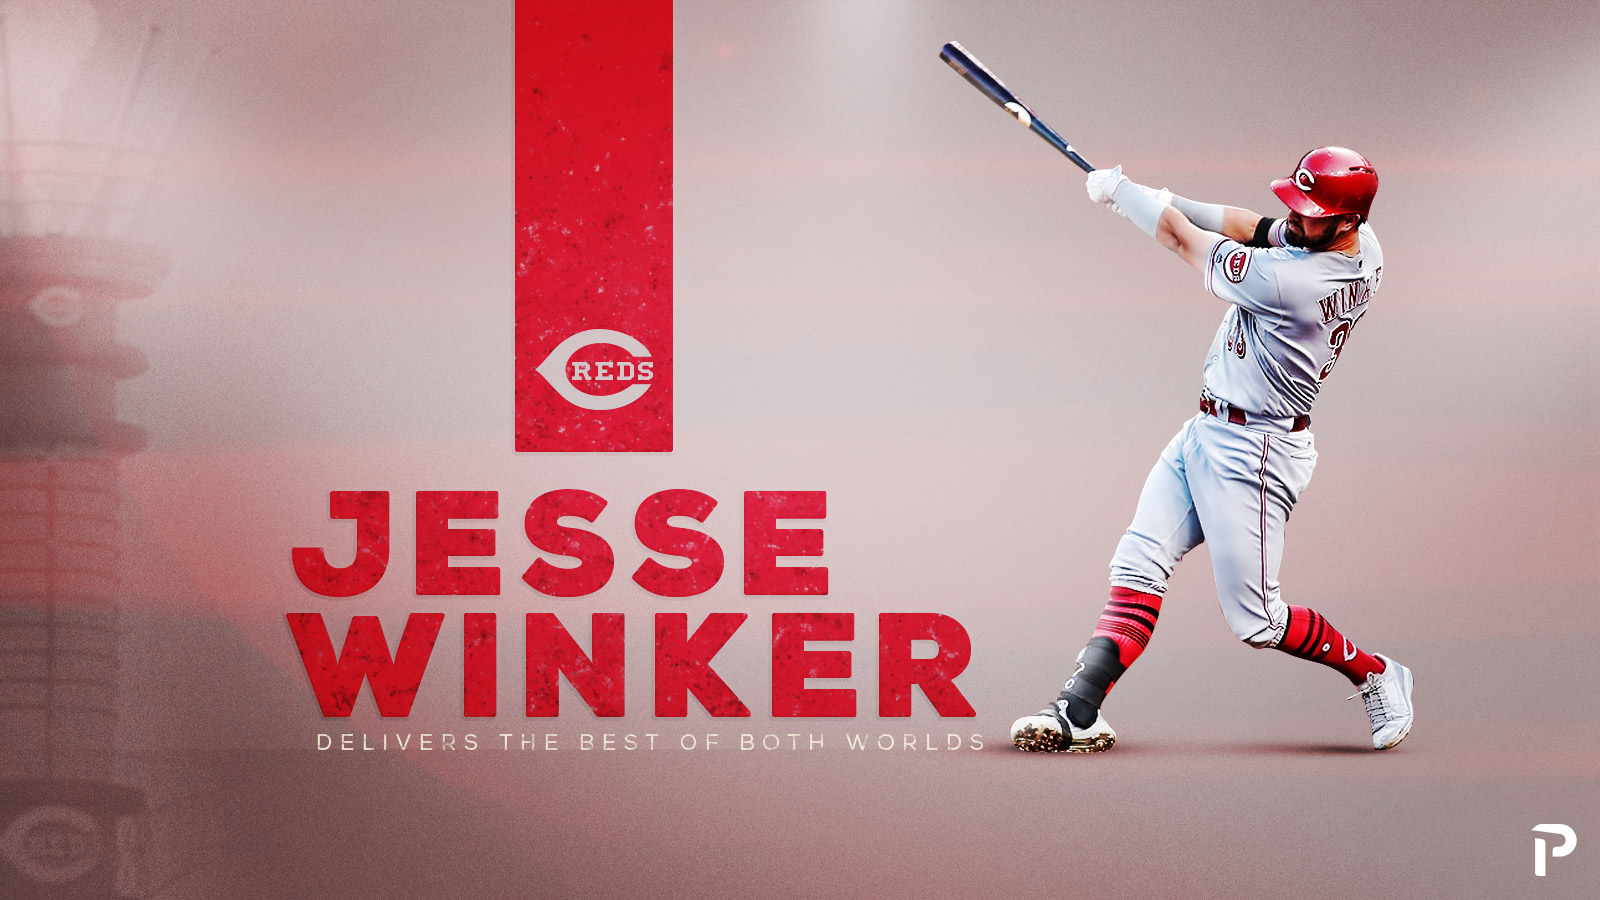 A career day for Jesse Winker